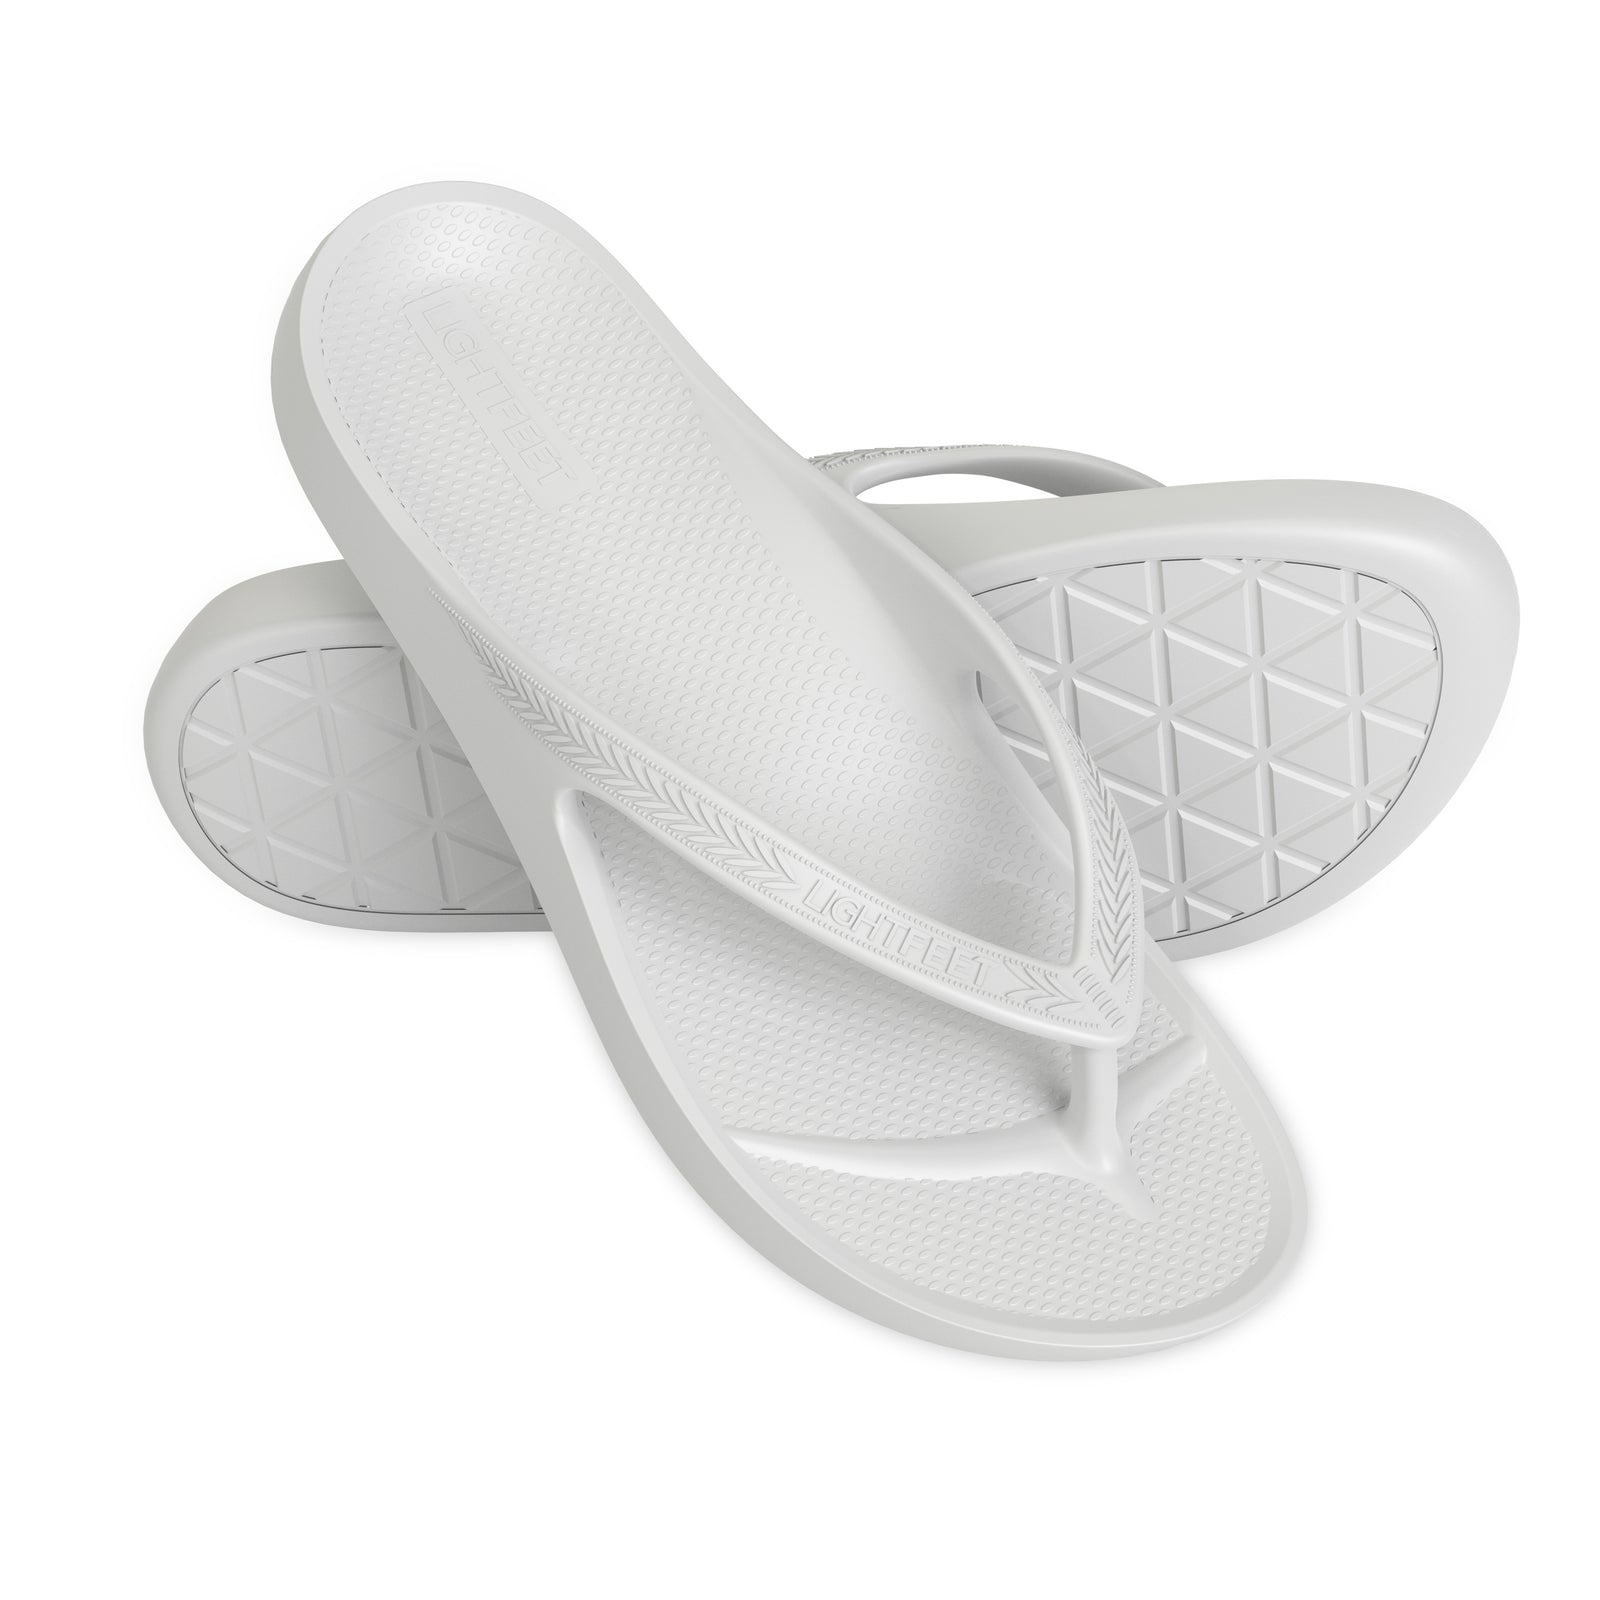 Archline Rebound Orthotic Slides - Mobility and Wellness